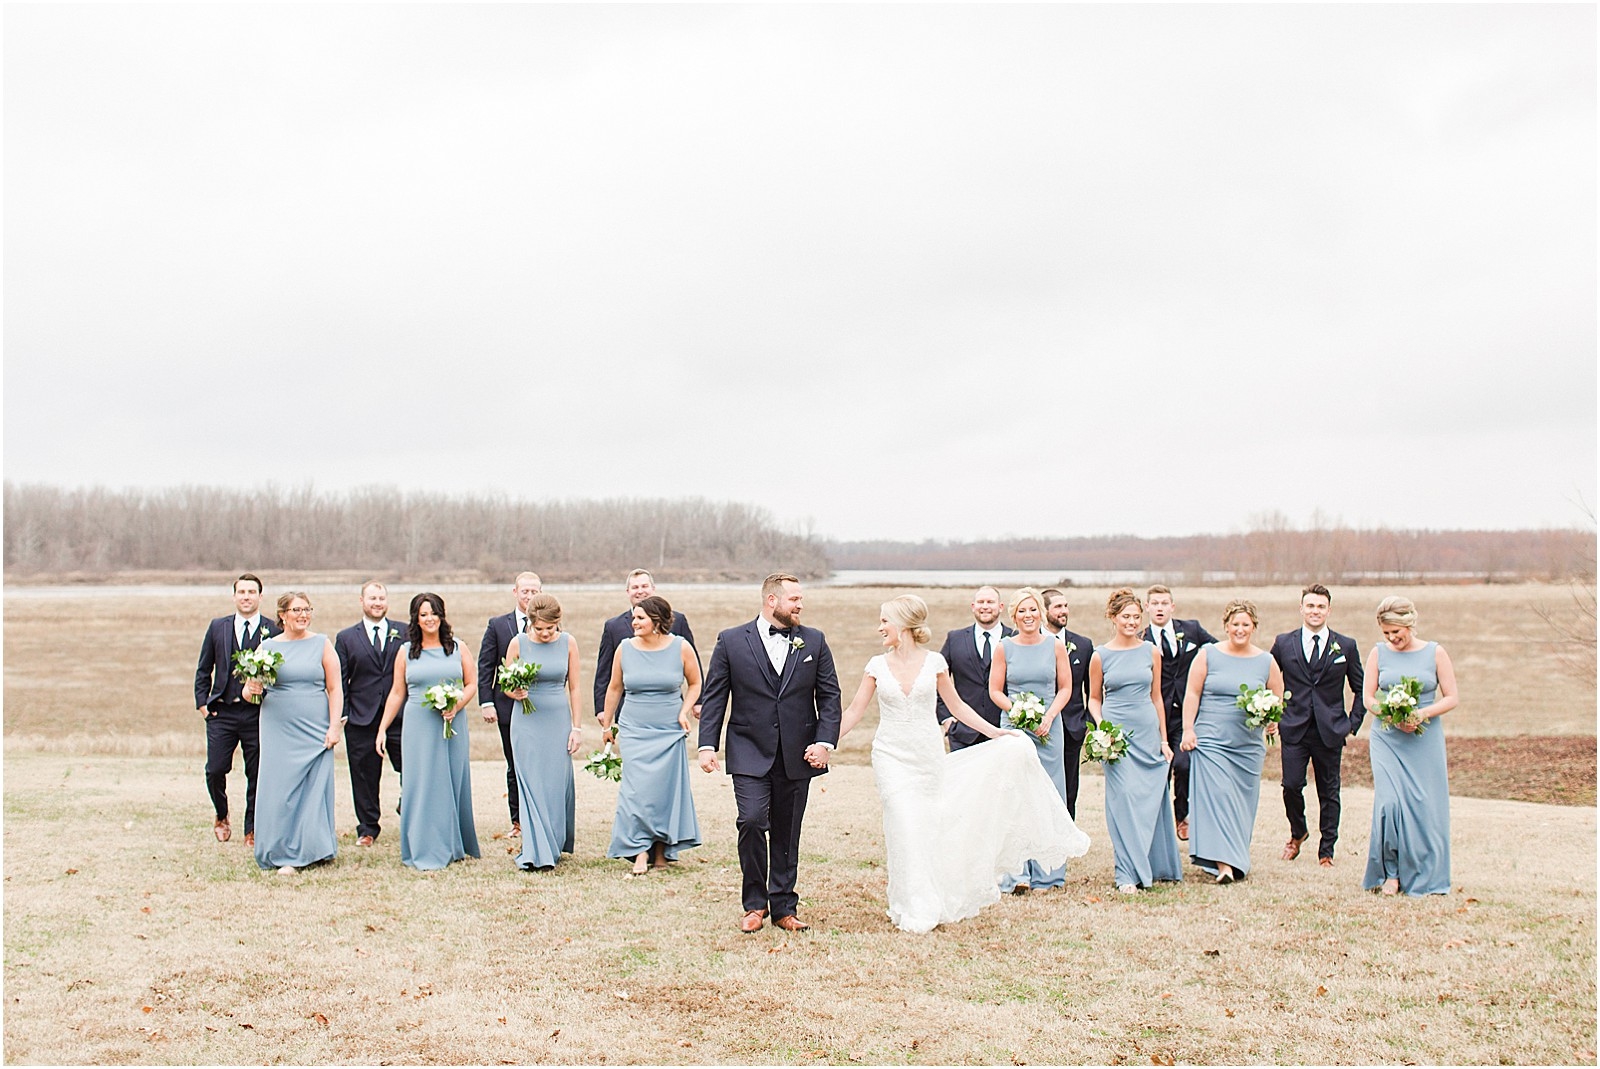 A Classic Winter Wedding in New Harmony | Rachel and Ryan | Bret and Brandie Photography 0071.jpg